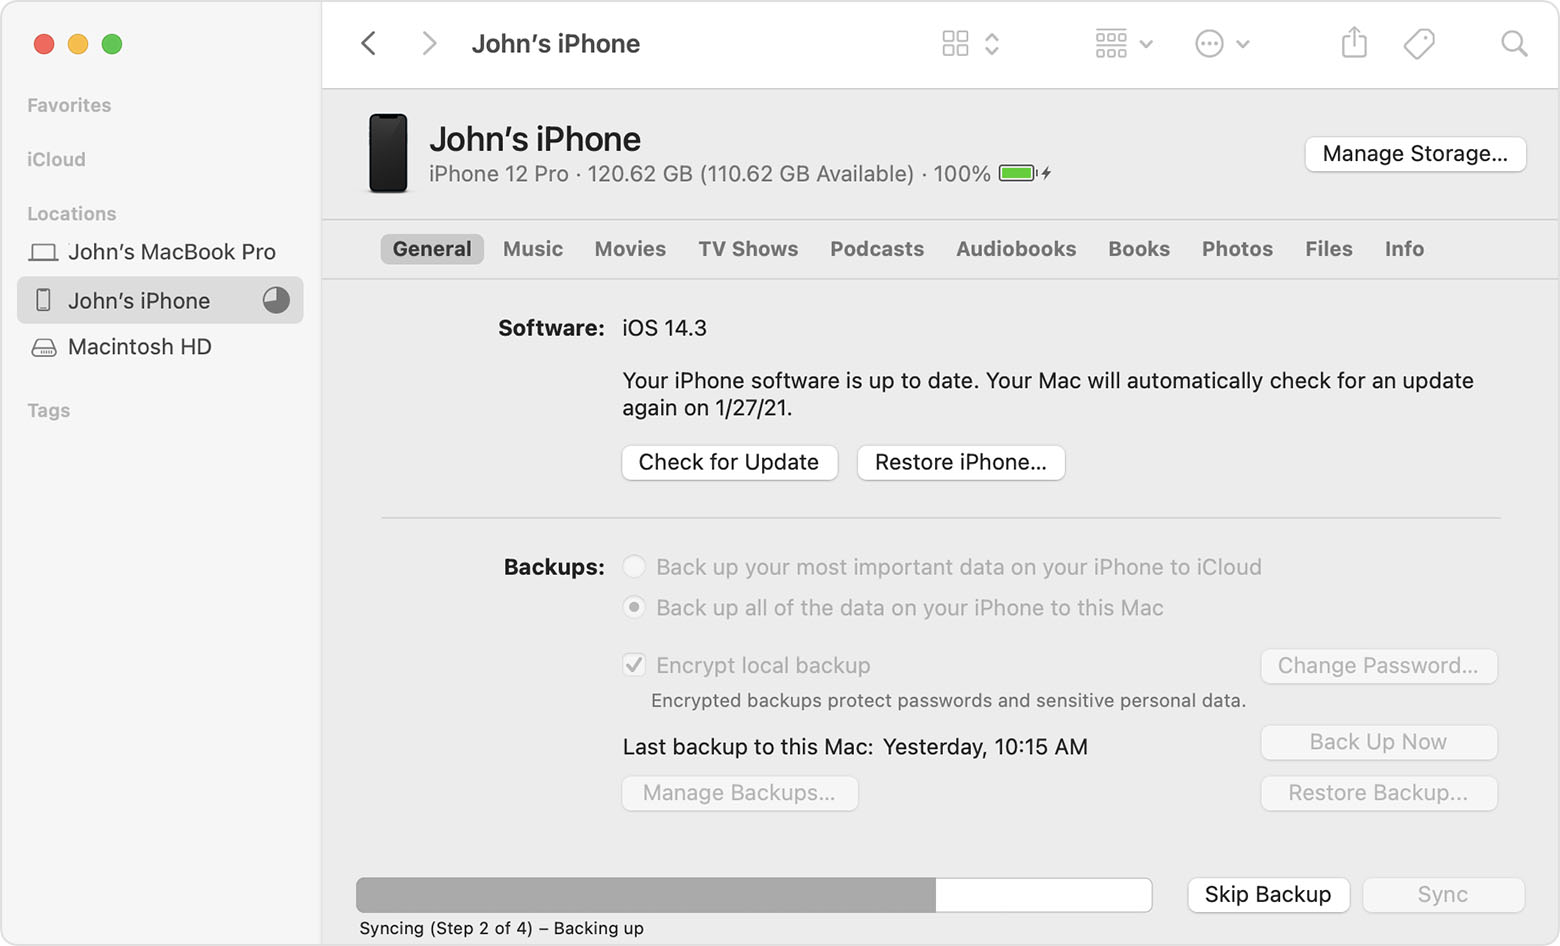 A Finder window showing an iPhone backup in progress.